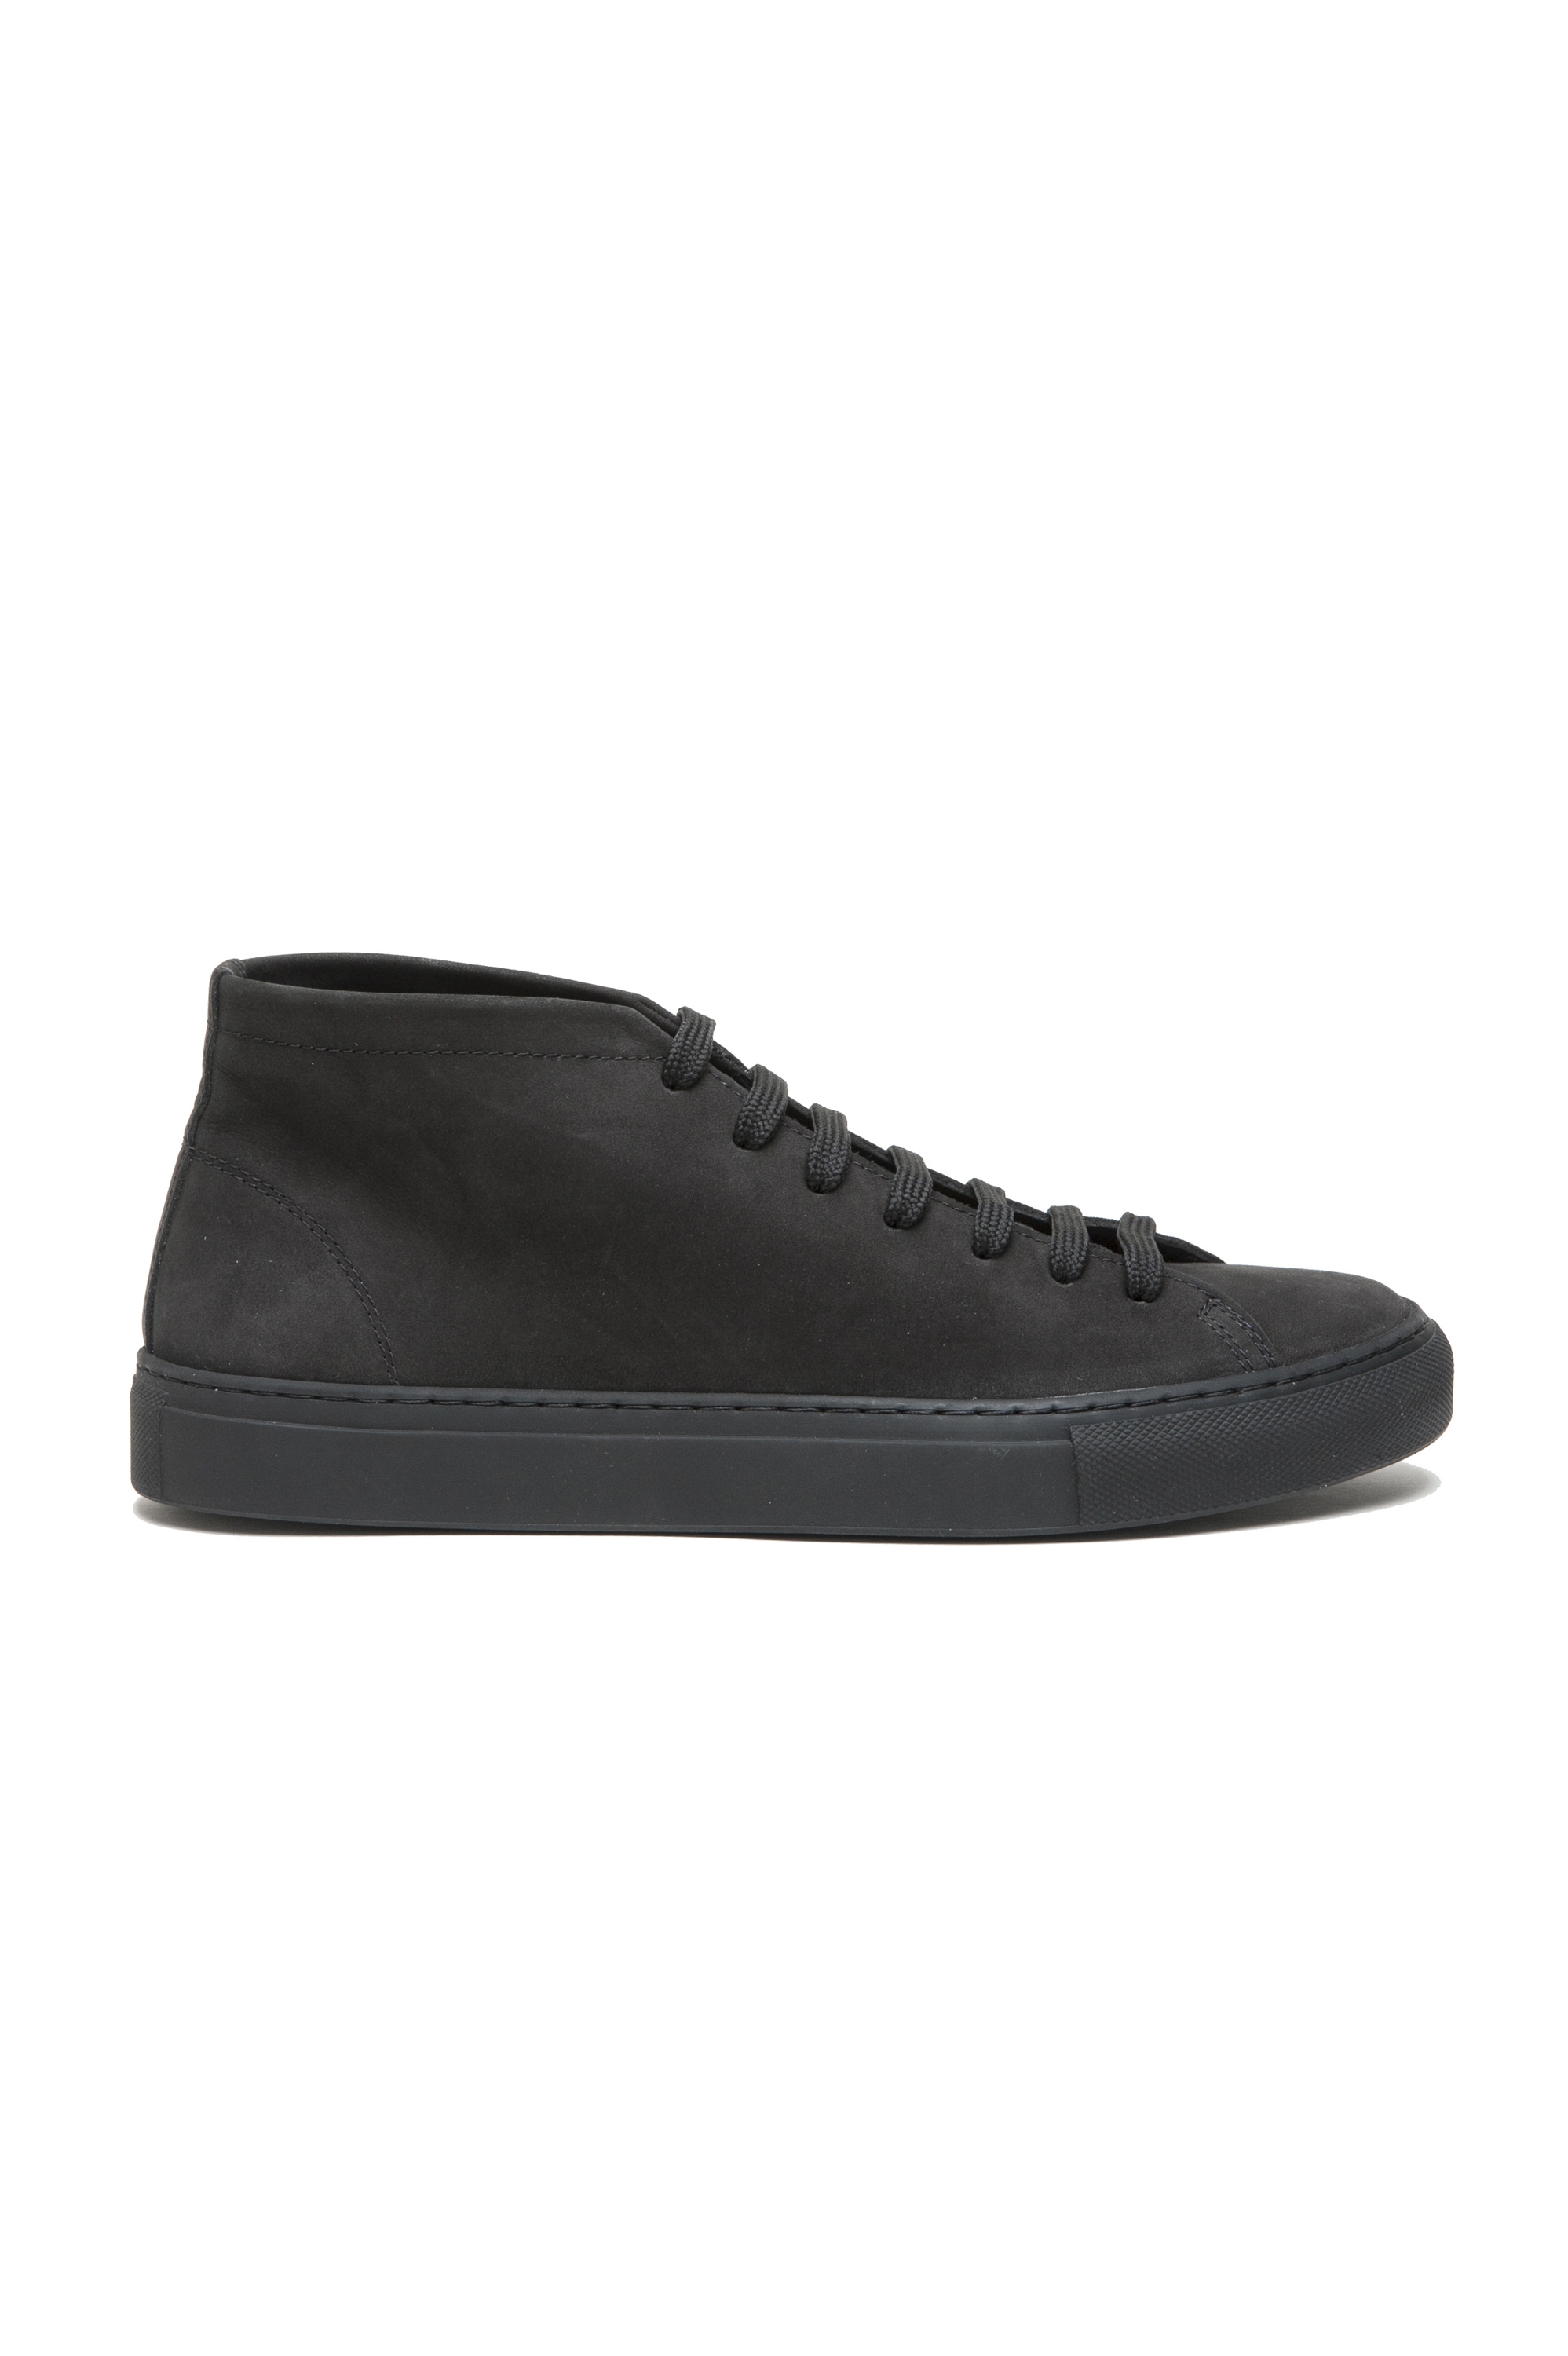 SBU 02862_2020SS Mid top lace up sneakers in black nubuck leather 01